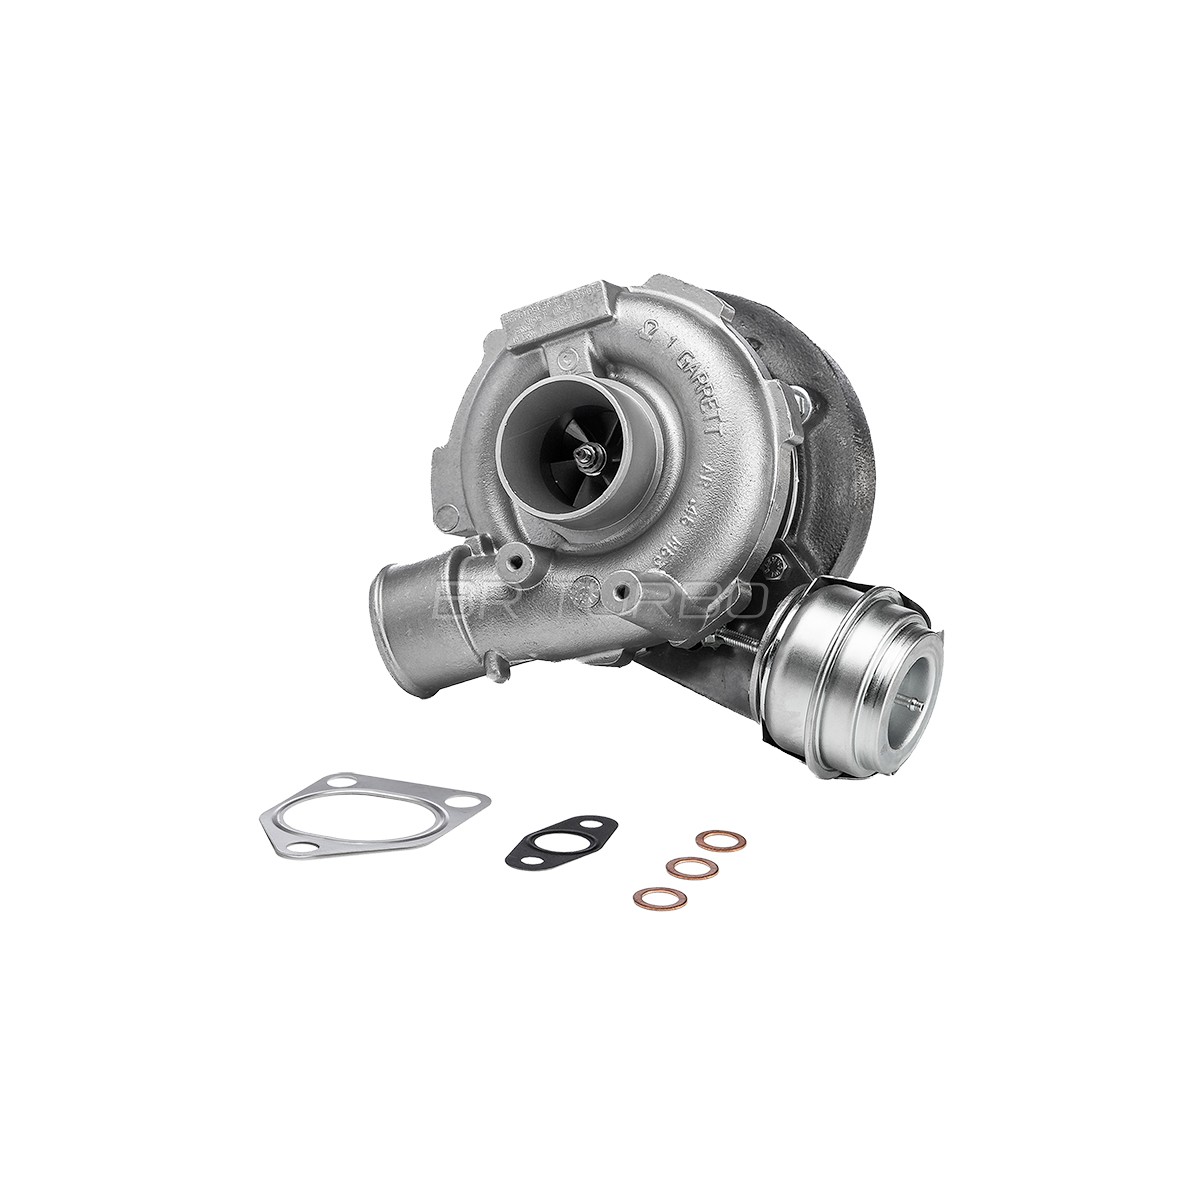 7104155001RSG Turbocharger REMANUFACTURED TURBOCHARGER WITH GASKET KIT BR Turbo 710415-5001RSG review and test